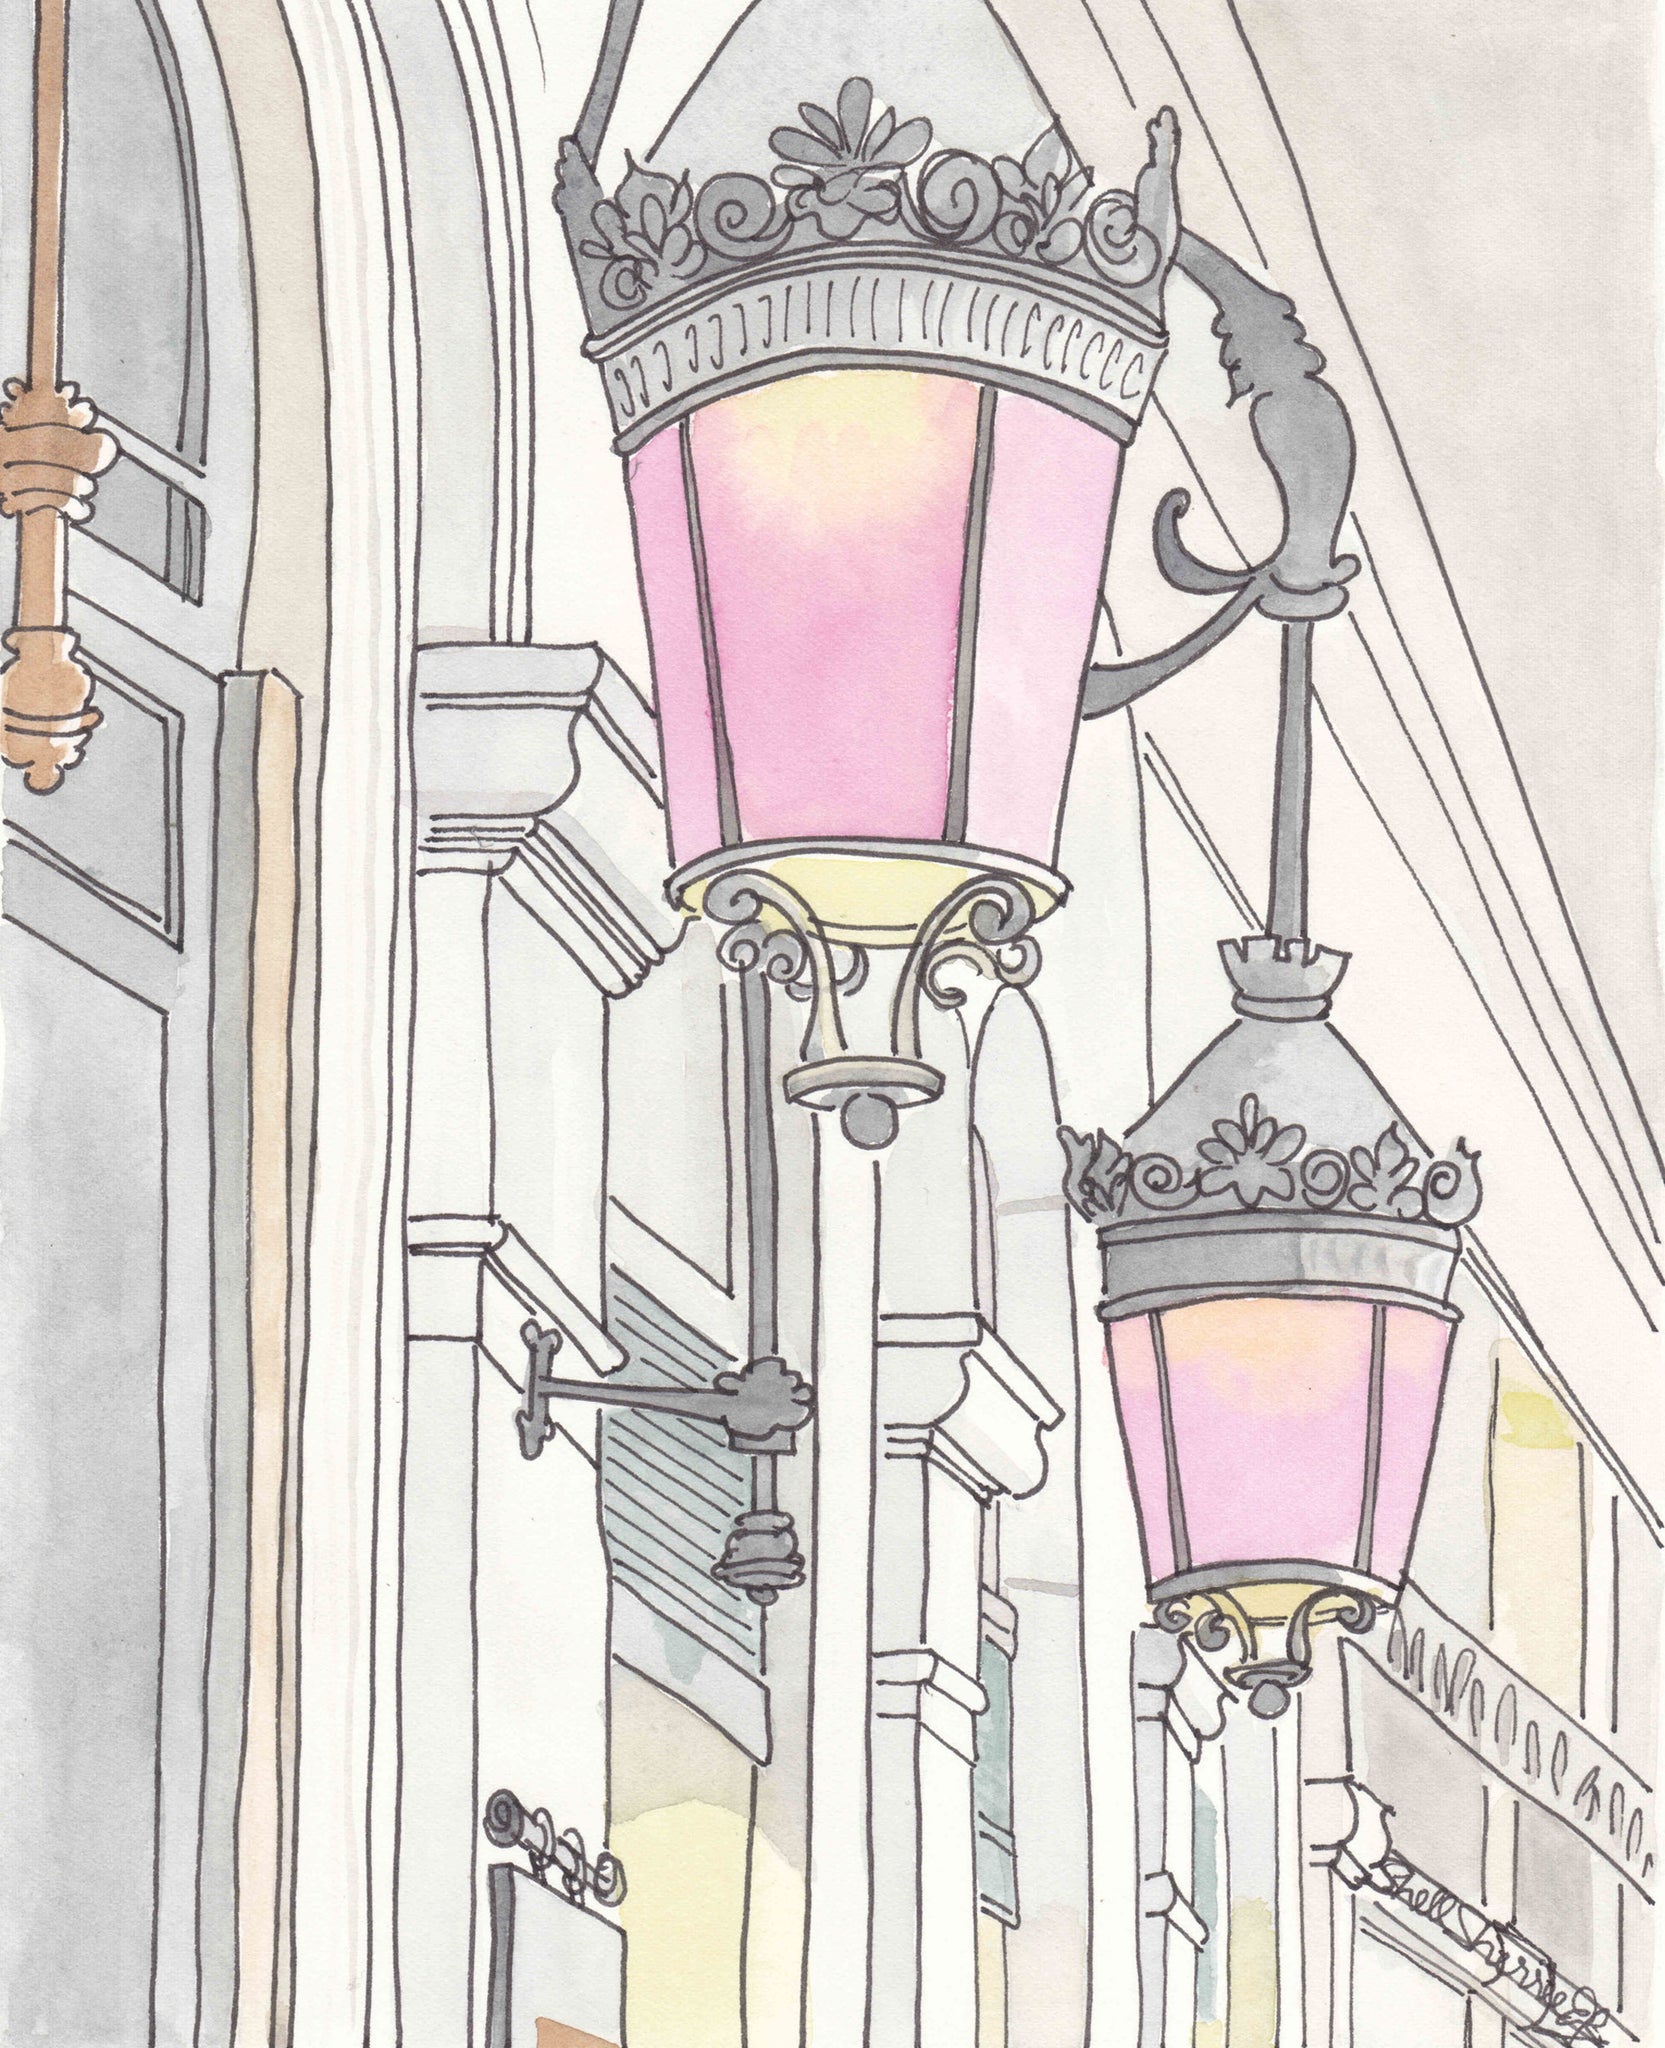 french wall art paris lamps with pink glass illustration by shell sherree